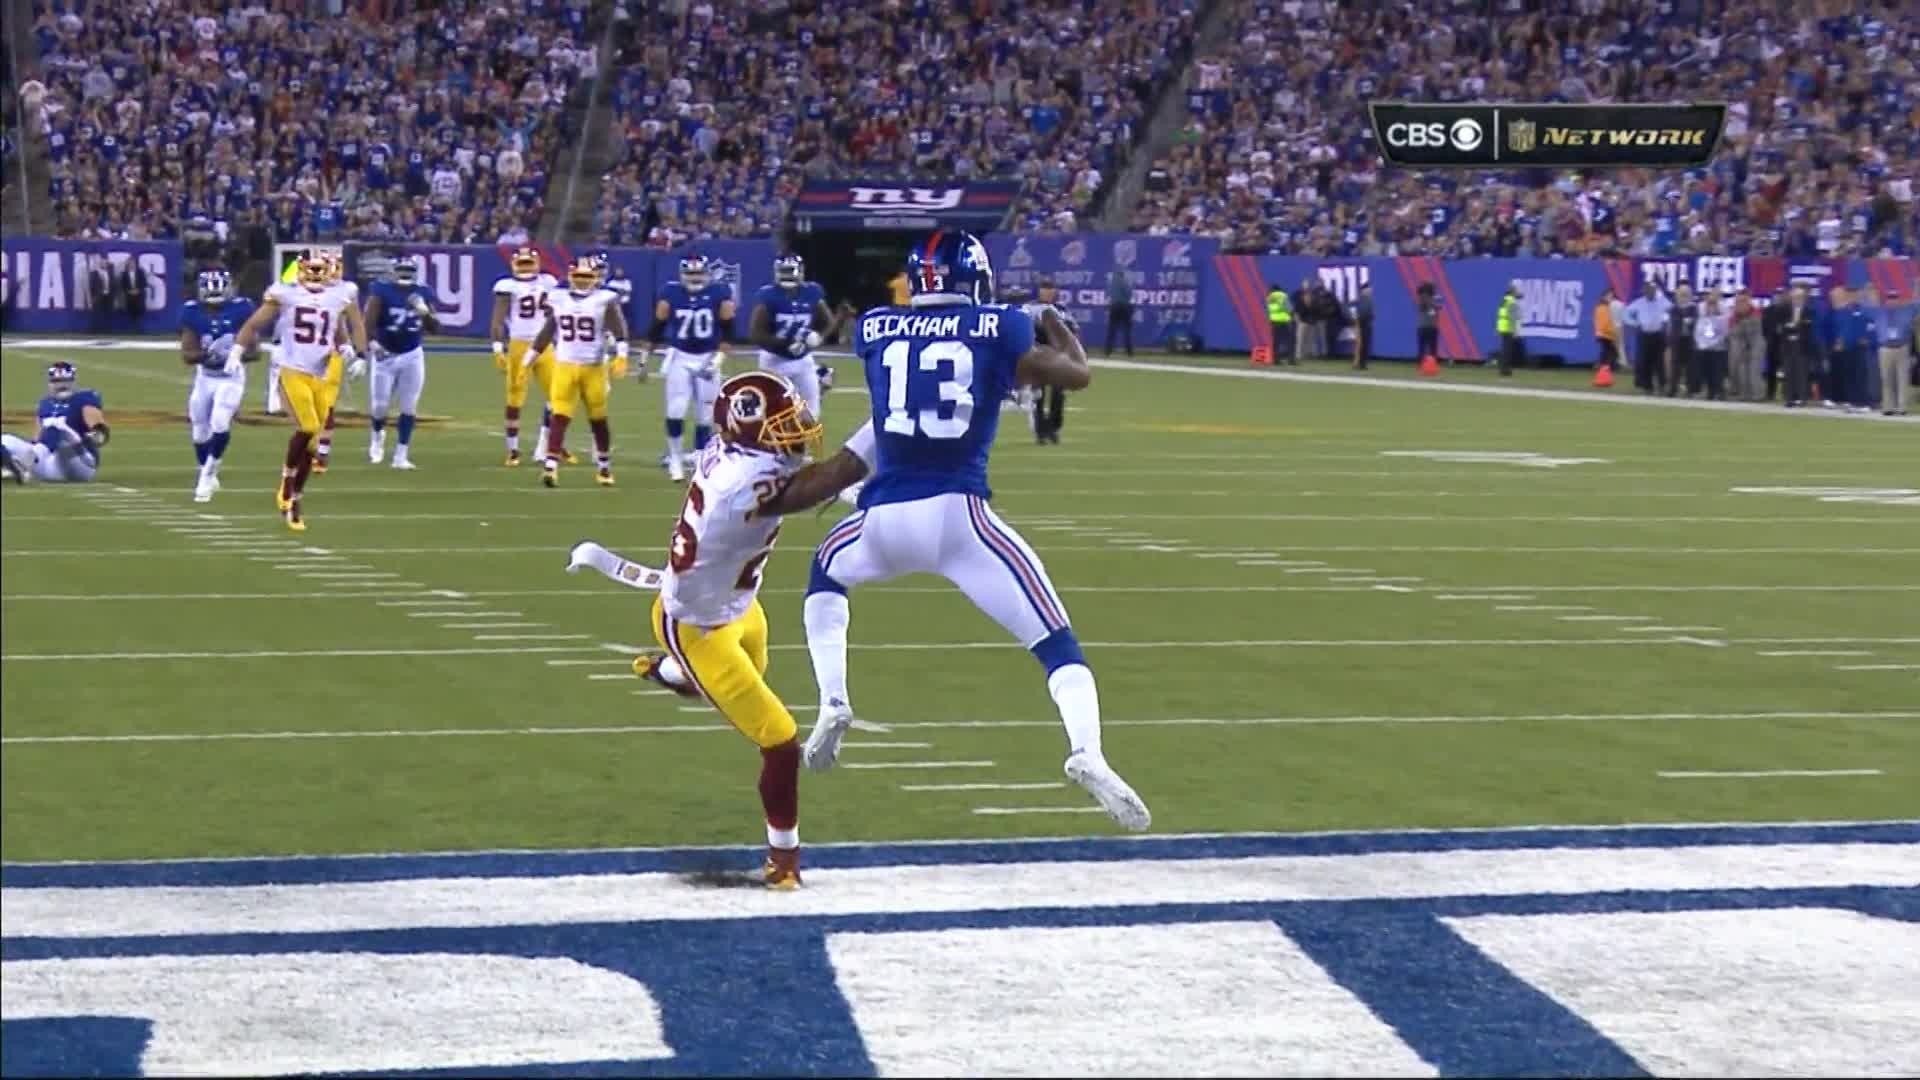 Beckham Jr produces an incredible touchdown catch in the Redskins clash